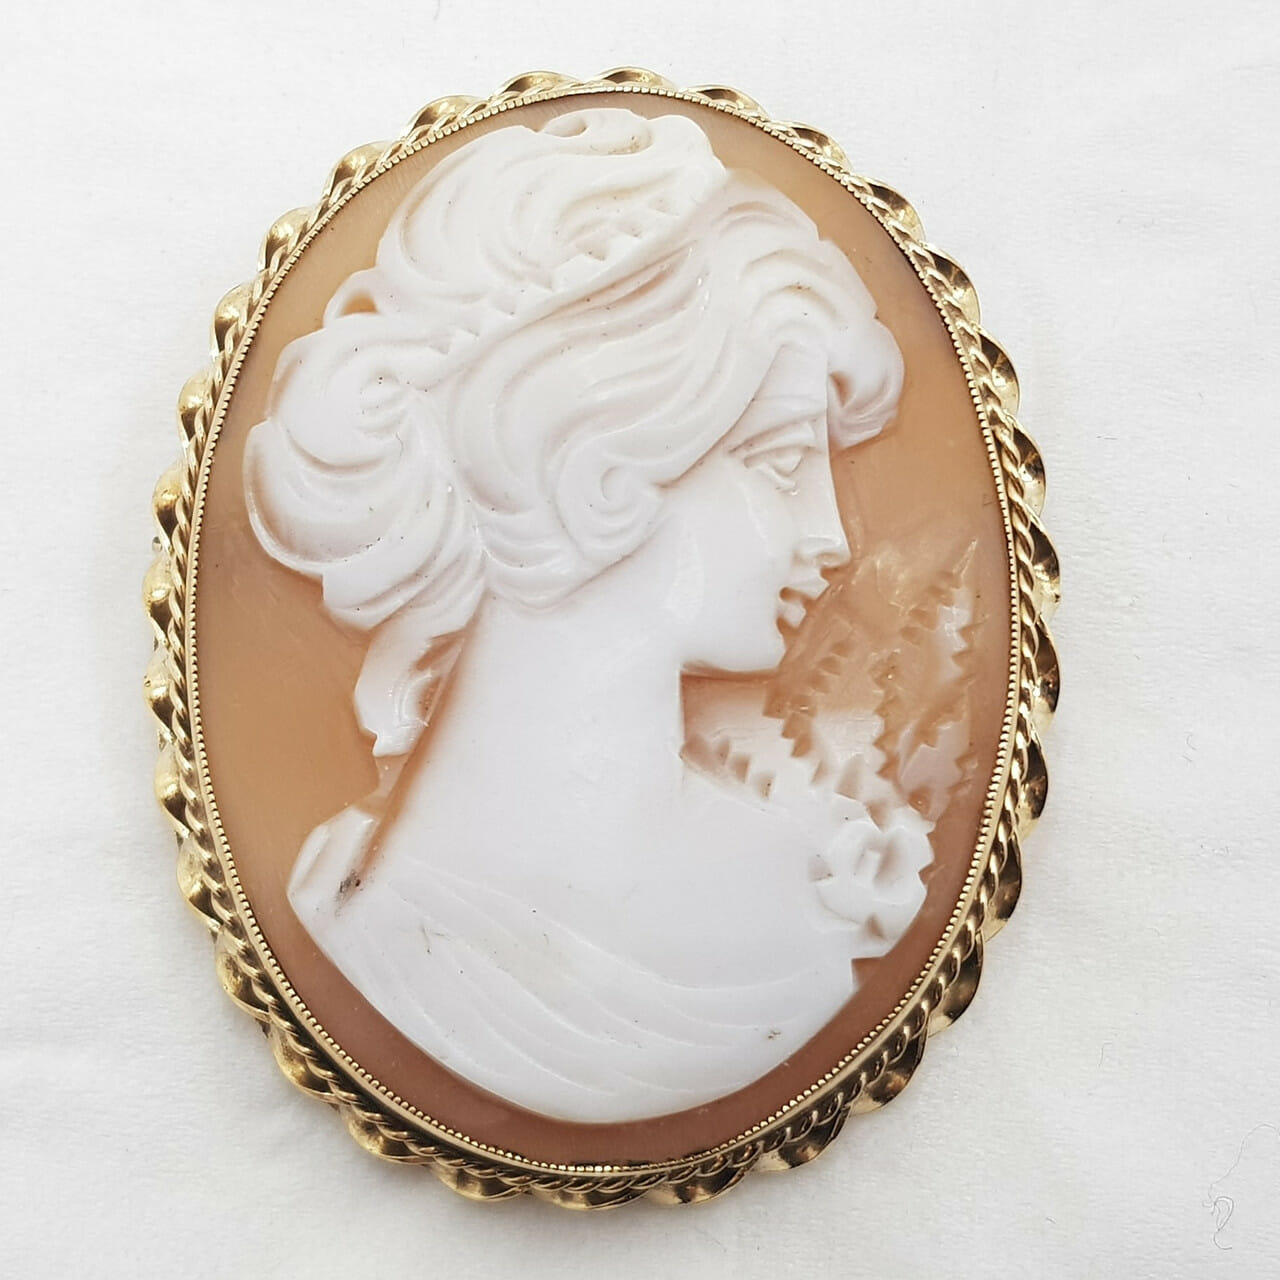 9CT 12.7GR YELLOW GOLD CAMEO BROOCH PIN OR PENDANT #43113